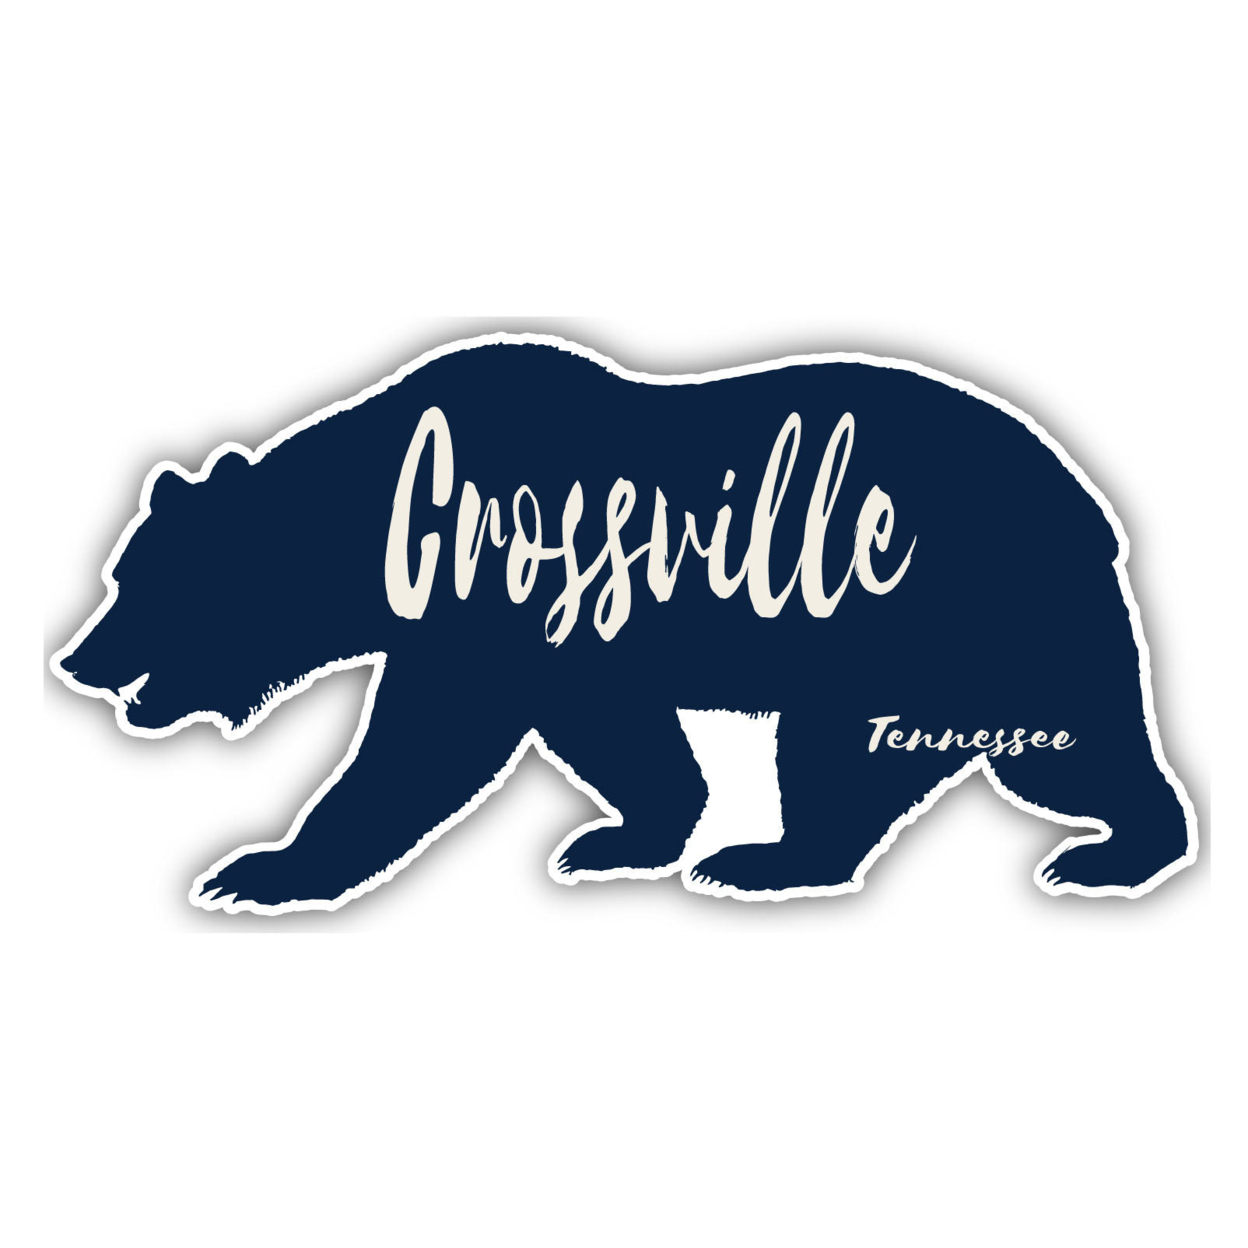 Crossville Tennessee Souvenir Decorative Stickers (Choose Theme And Size) - Single Unit, 10-Inch, Bear